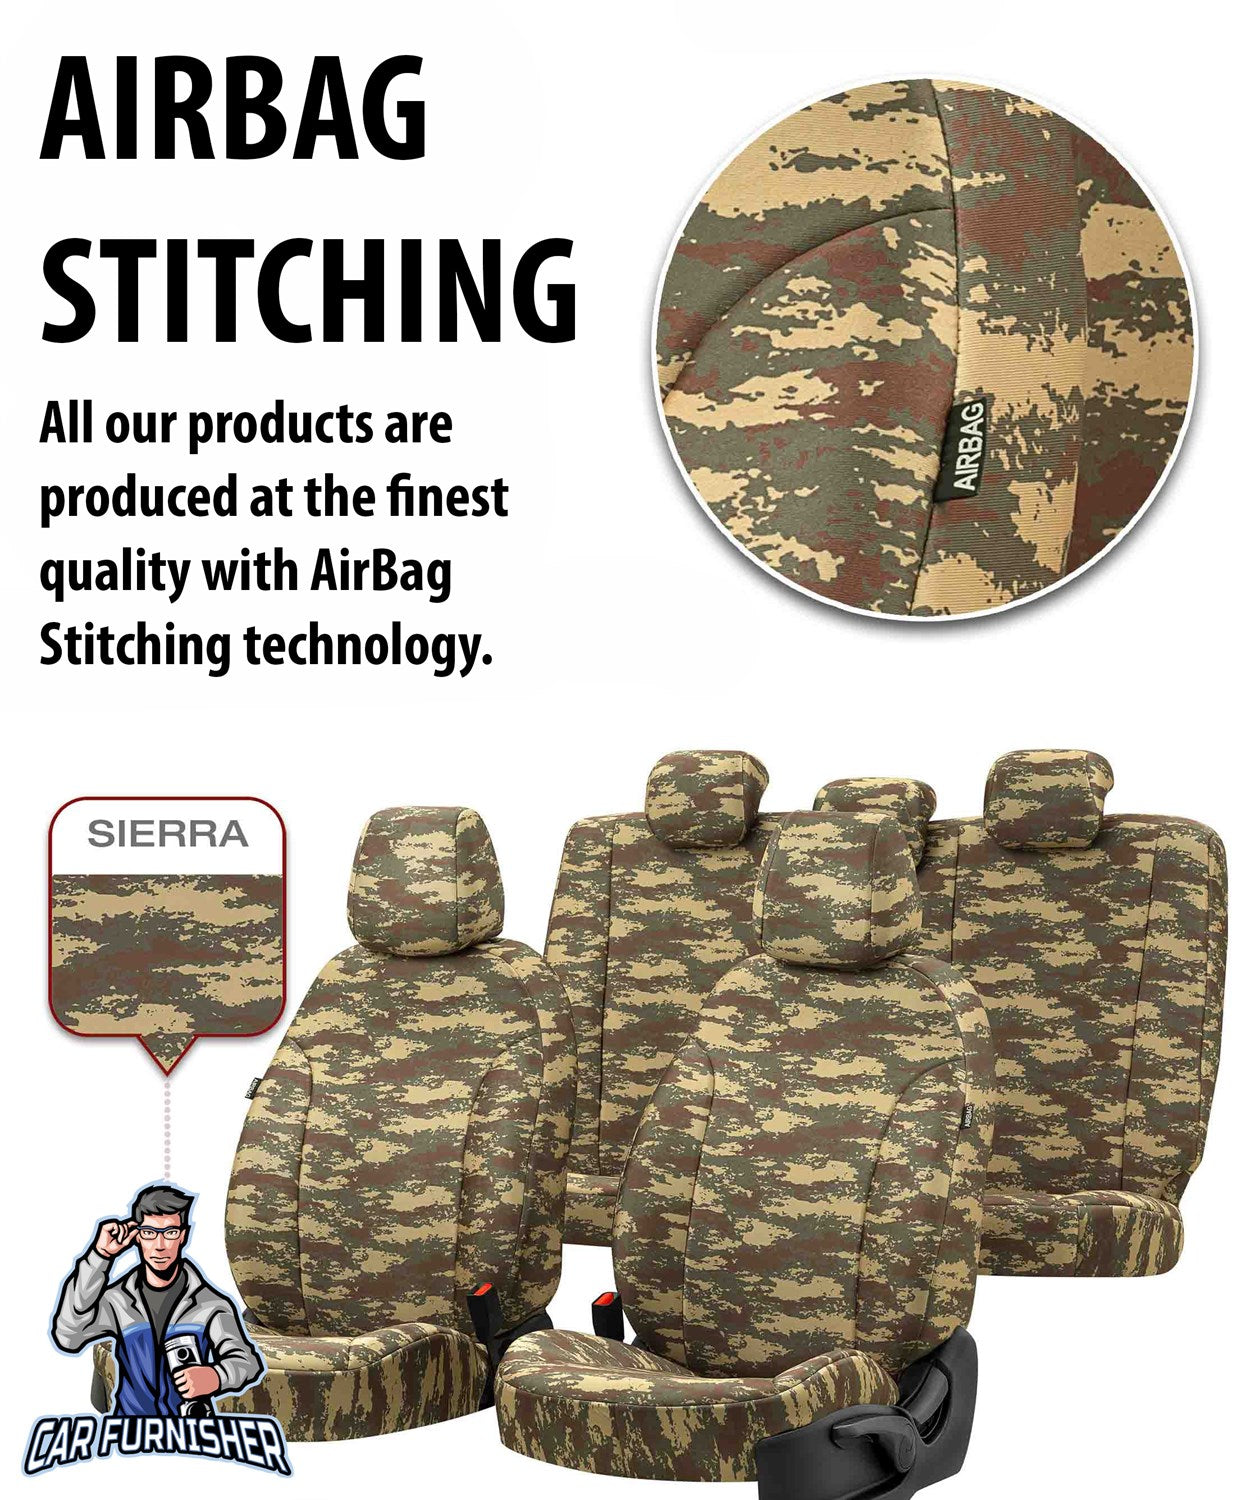 Chevrolet Spark Seat Covers Camouflage Waterproof Design Himalayan Camo Waterproof Fabric